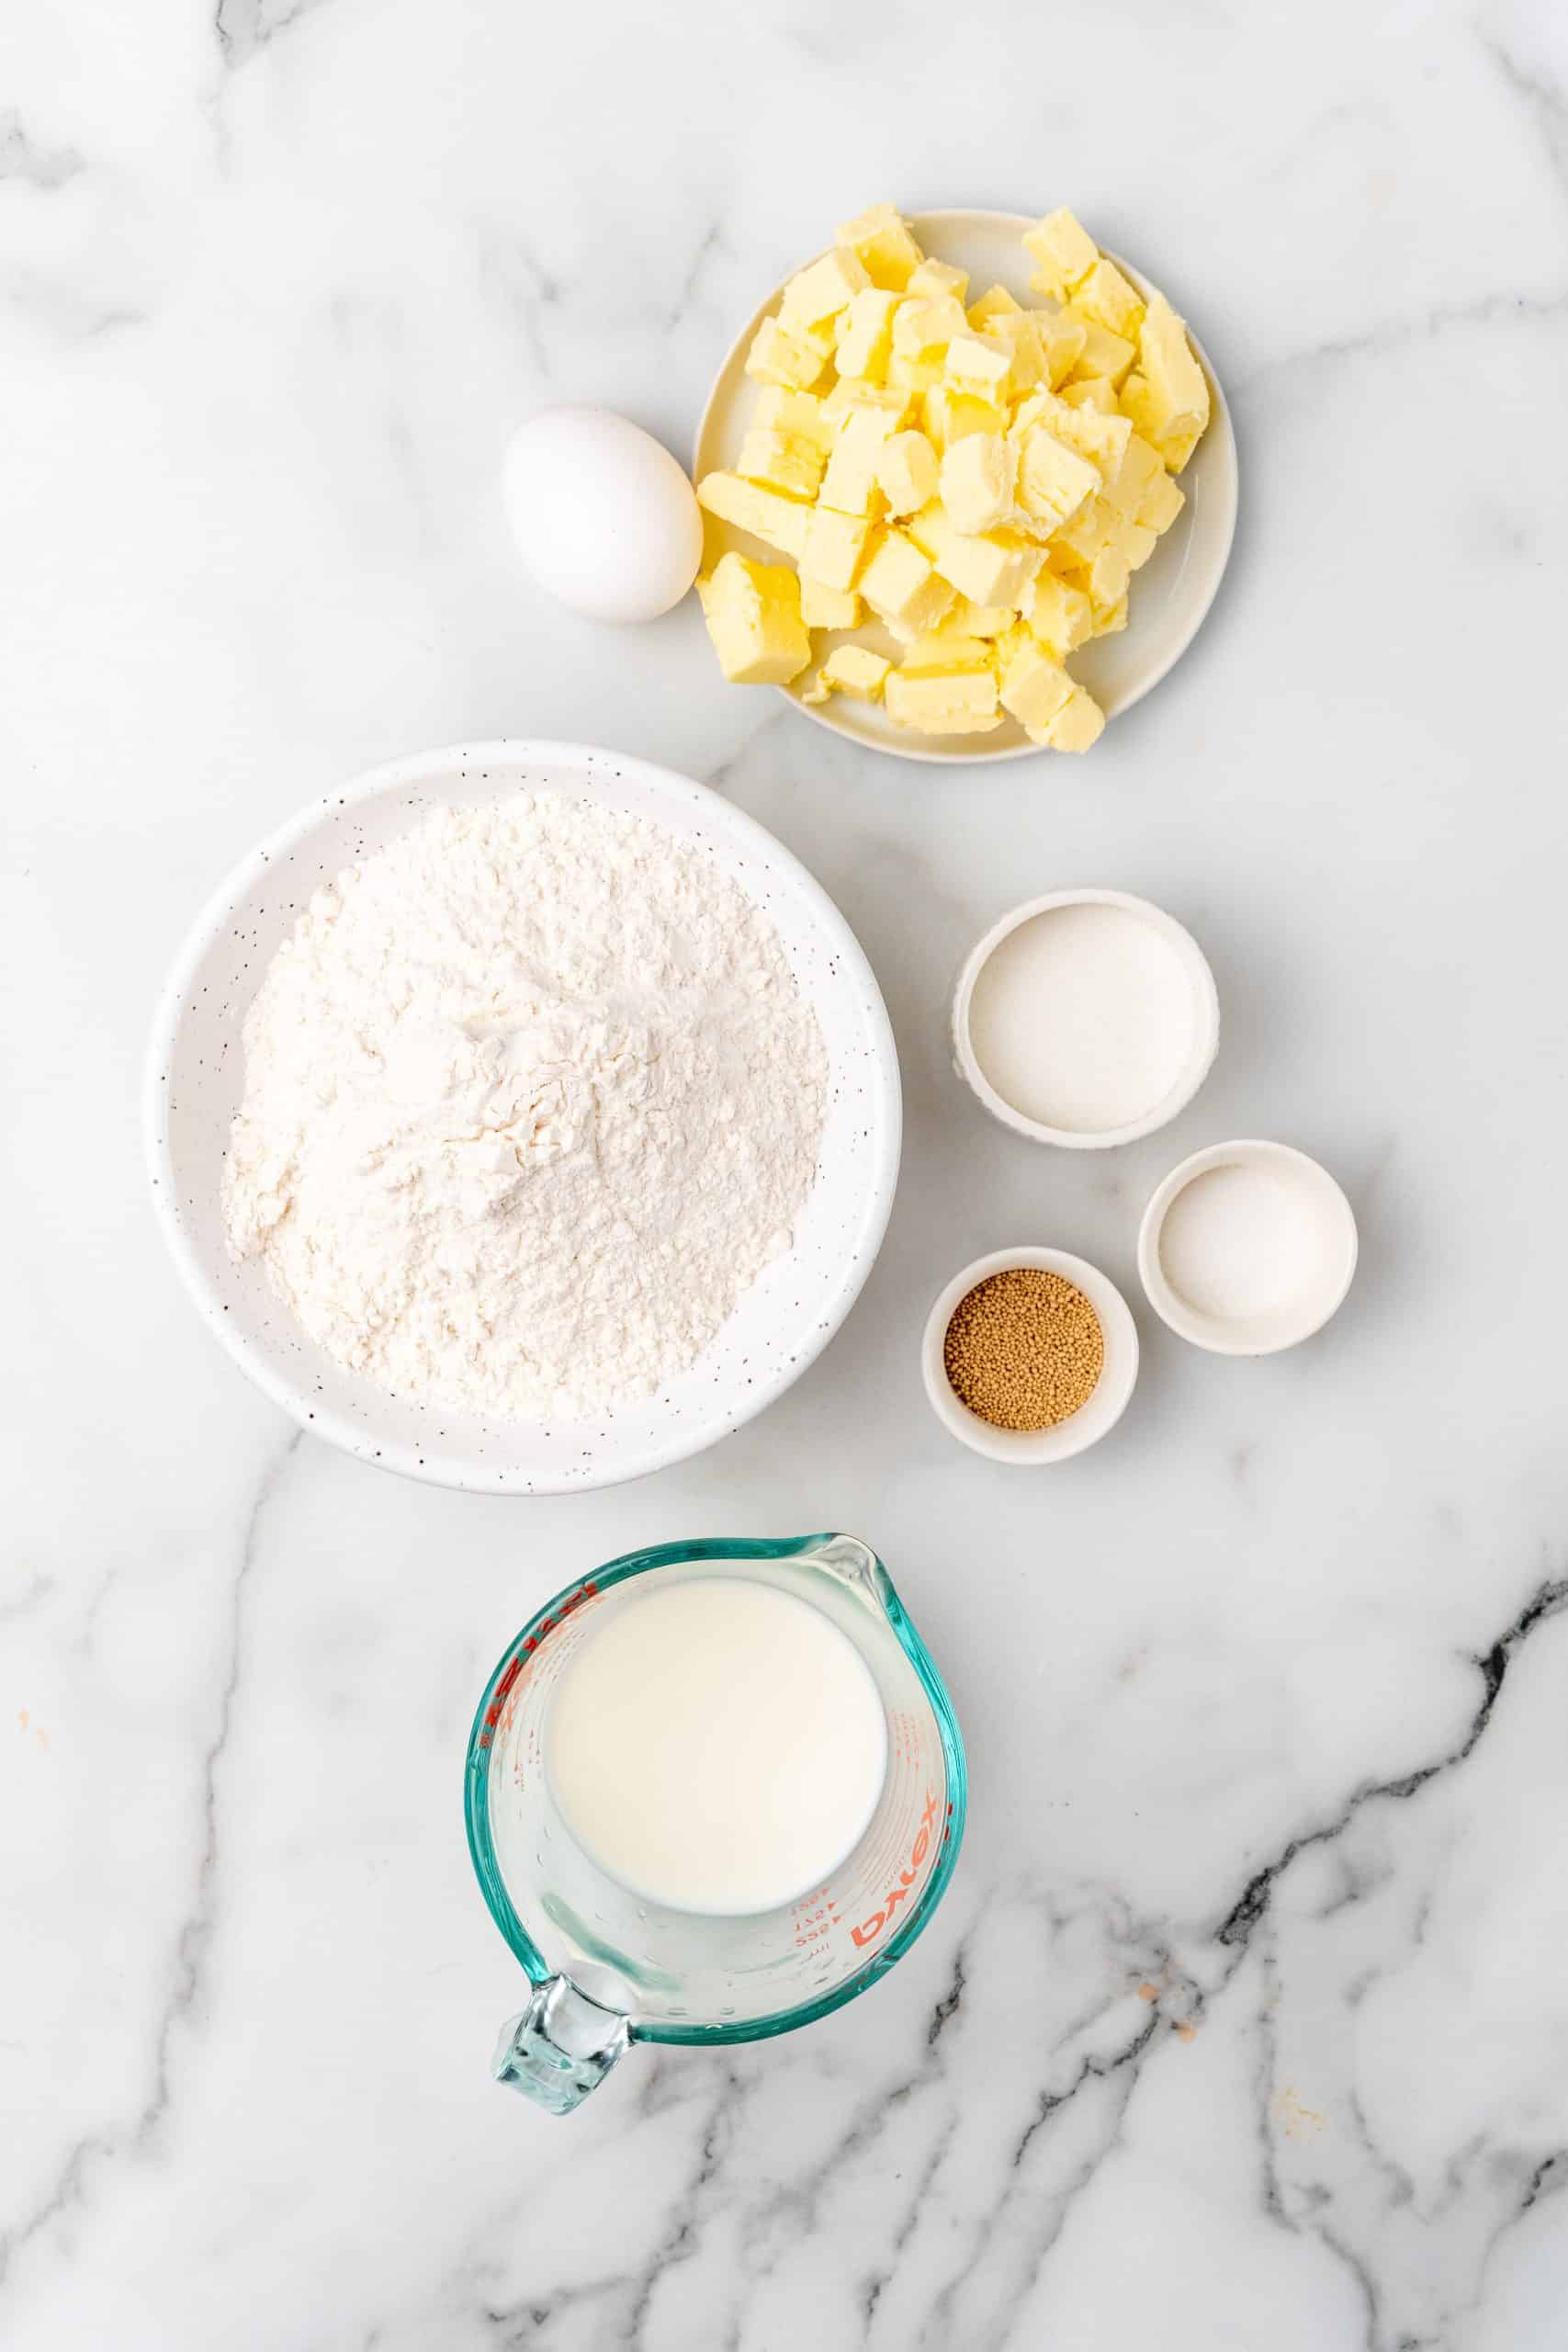 an overhead image showing the measured ingredients needed to make a homemade butter croissant recipe